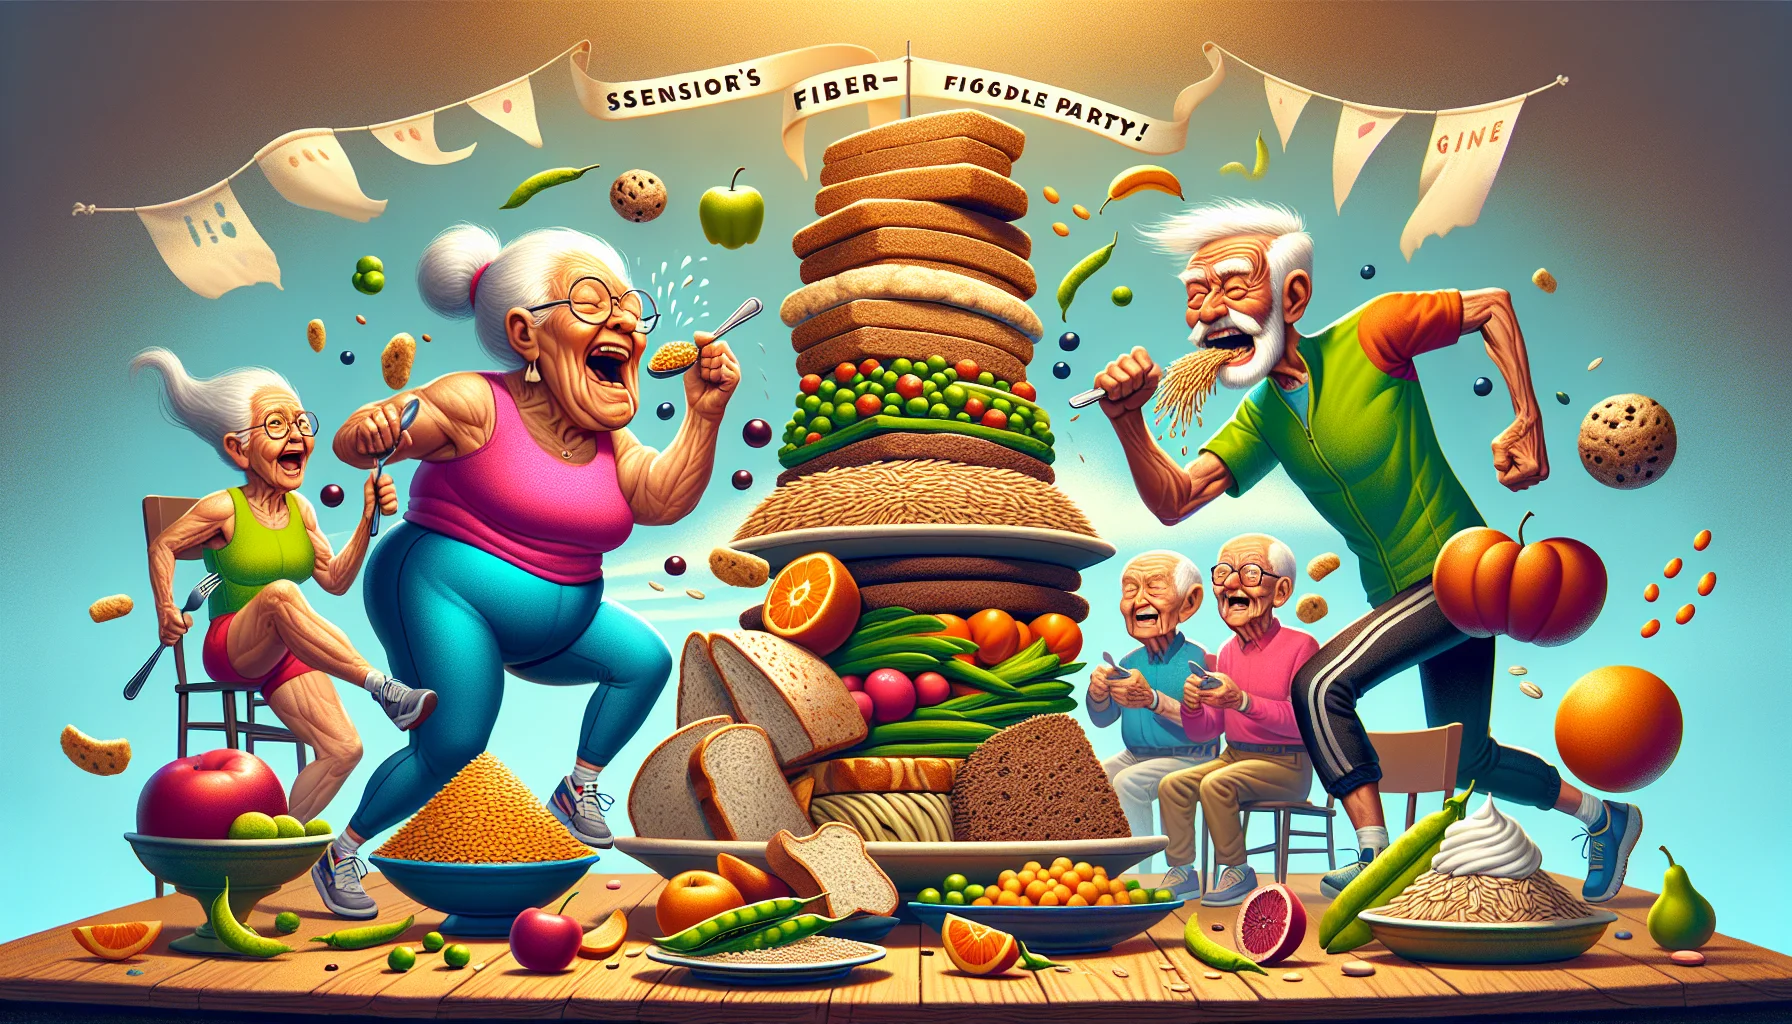 An amusing scene showcasing different foods high in insoluble fiber, organized comically. In the center, a couple of elderly individuals, a South Asian woman and a Hispanic man, both energetically dressed in vibrant athletic gear, enthusiastically devouring giant servings of whole grain bread and raw vegetables. Nearby, a plate piled high with brown rice, oats, and peas wobbles precariously, about to topple over. On another table, a pyramid of fresh fruits seems to defy gravity. In the background, a banner with the words 'Senior's Fiber-Rich Food Party!' flutters in a gentle breeze. The atmosphere is lively, warm, and engaging, emphasizing the joys of a healthy diet.